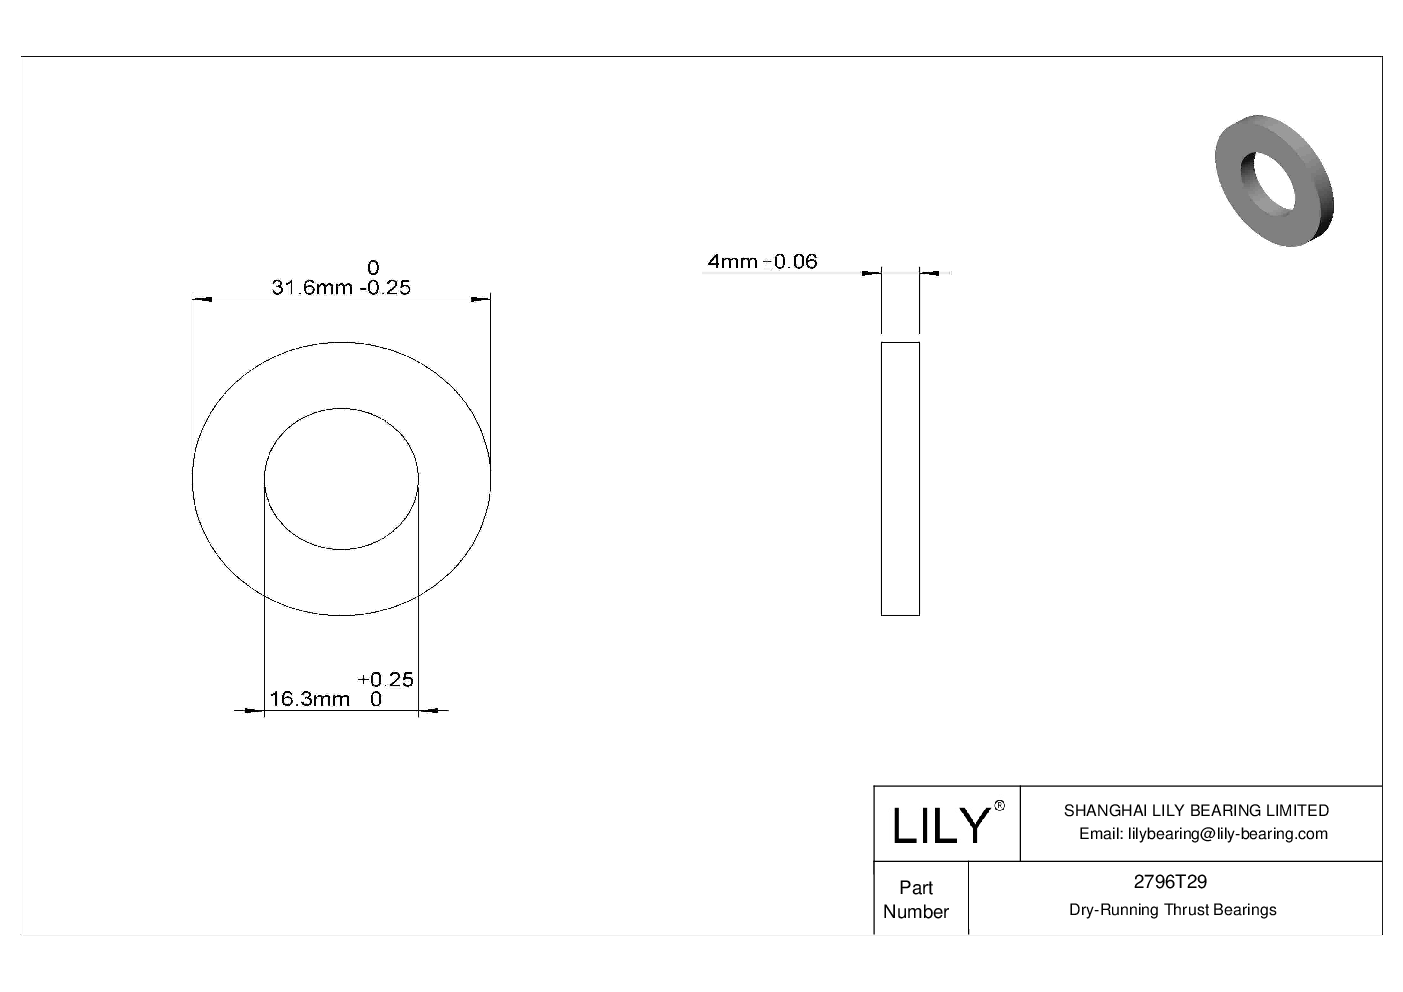 CHJGTCJ Ultra-Low-Friction Dry-Running Thrust Bearings cad drawing